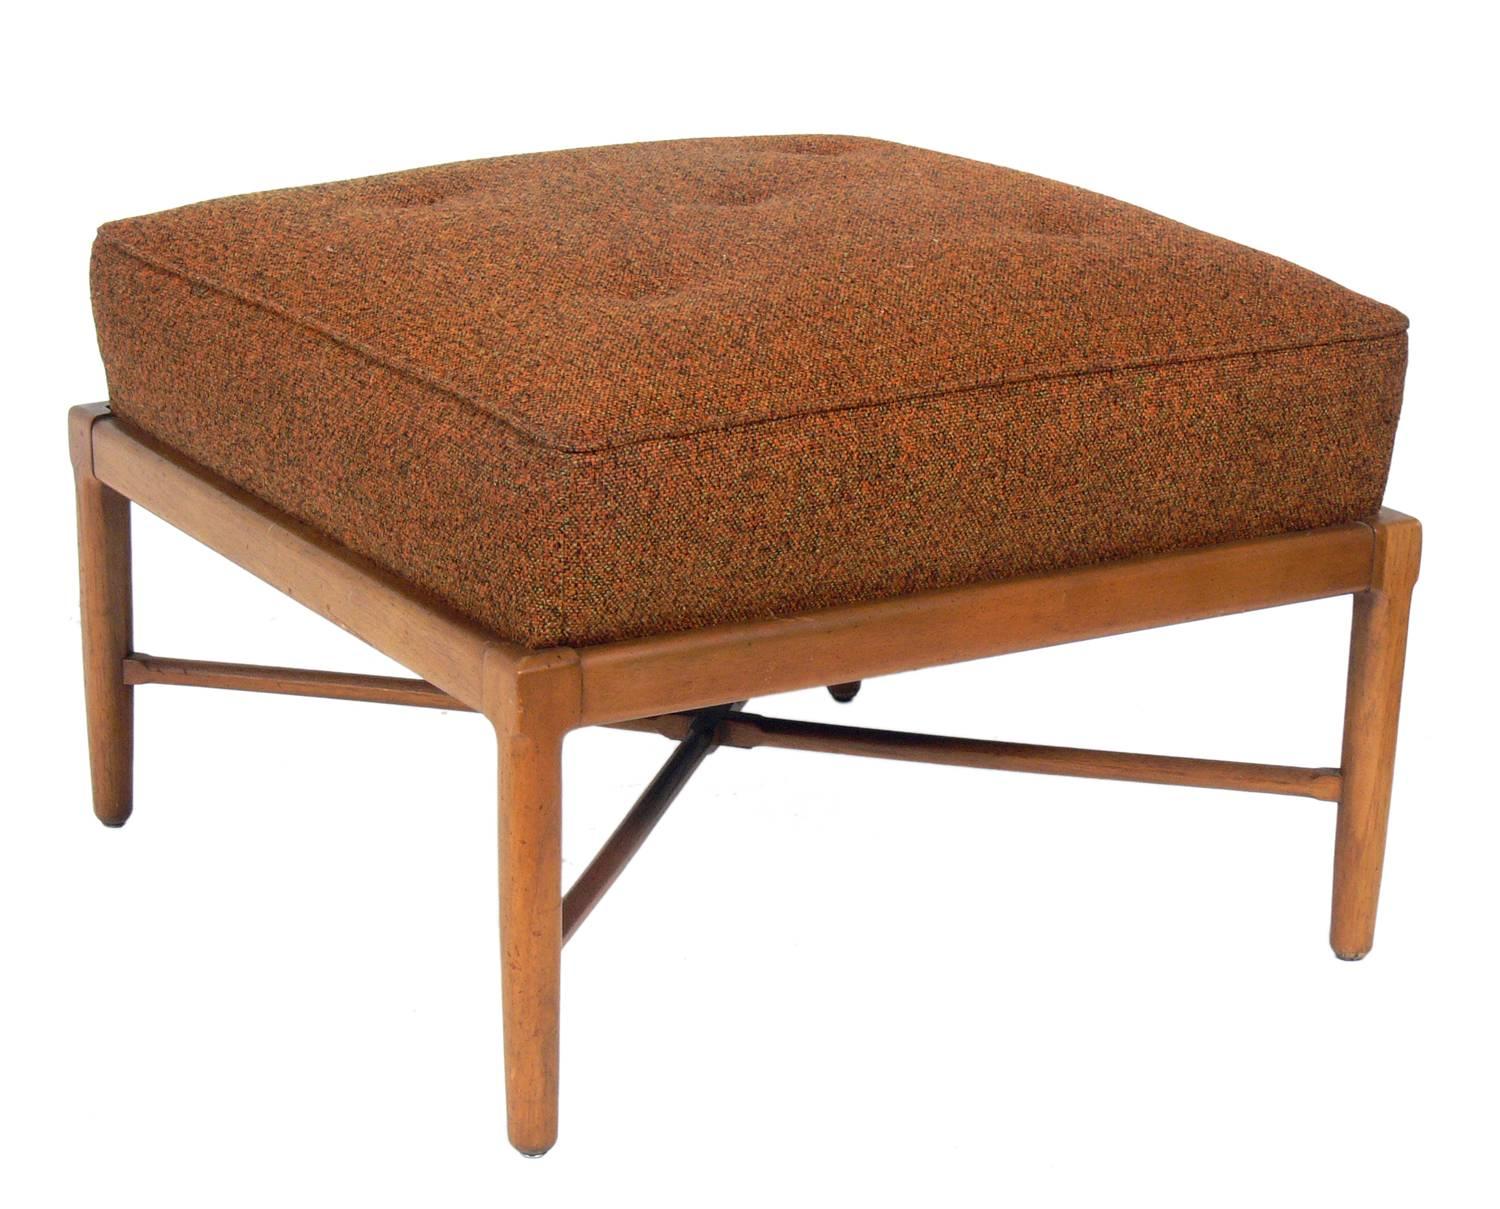 Mid-Century Modern Large-Scale X-Based Ottoman or Stool by Lubberts and Mulder for Tomlinson